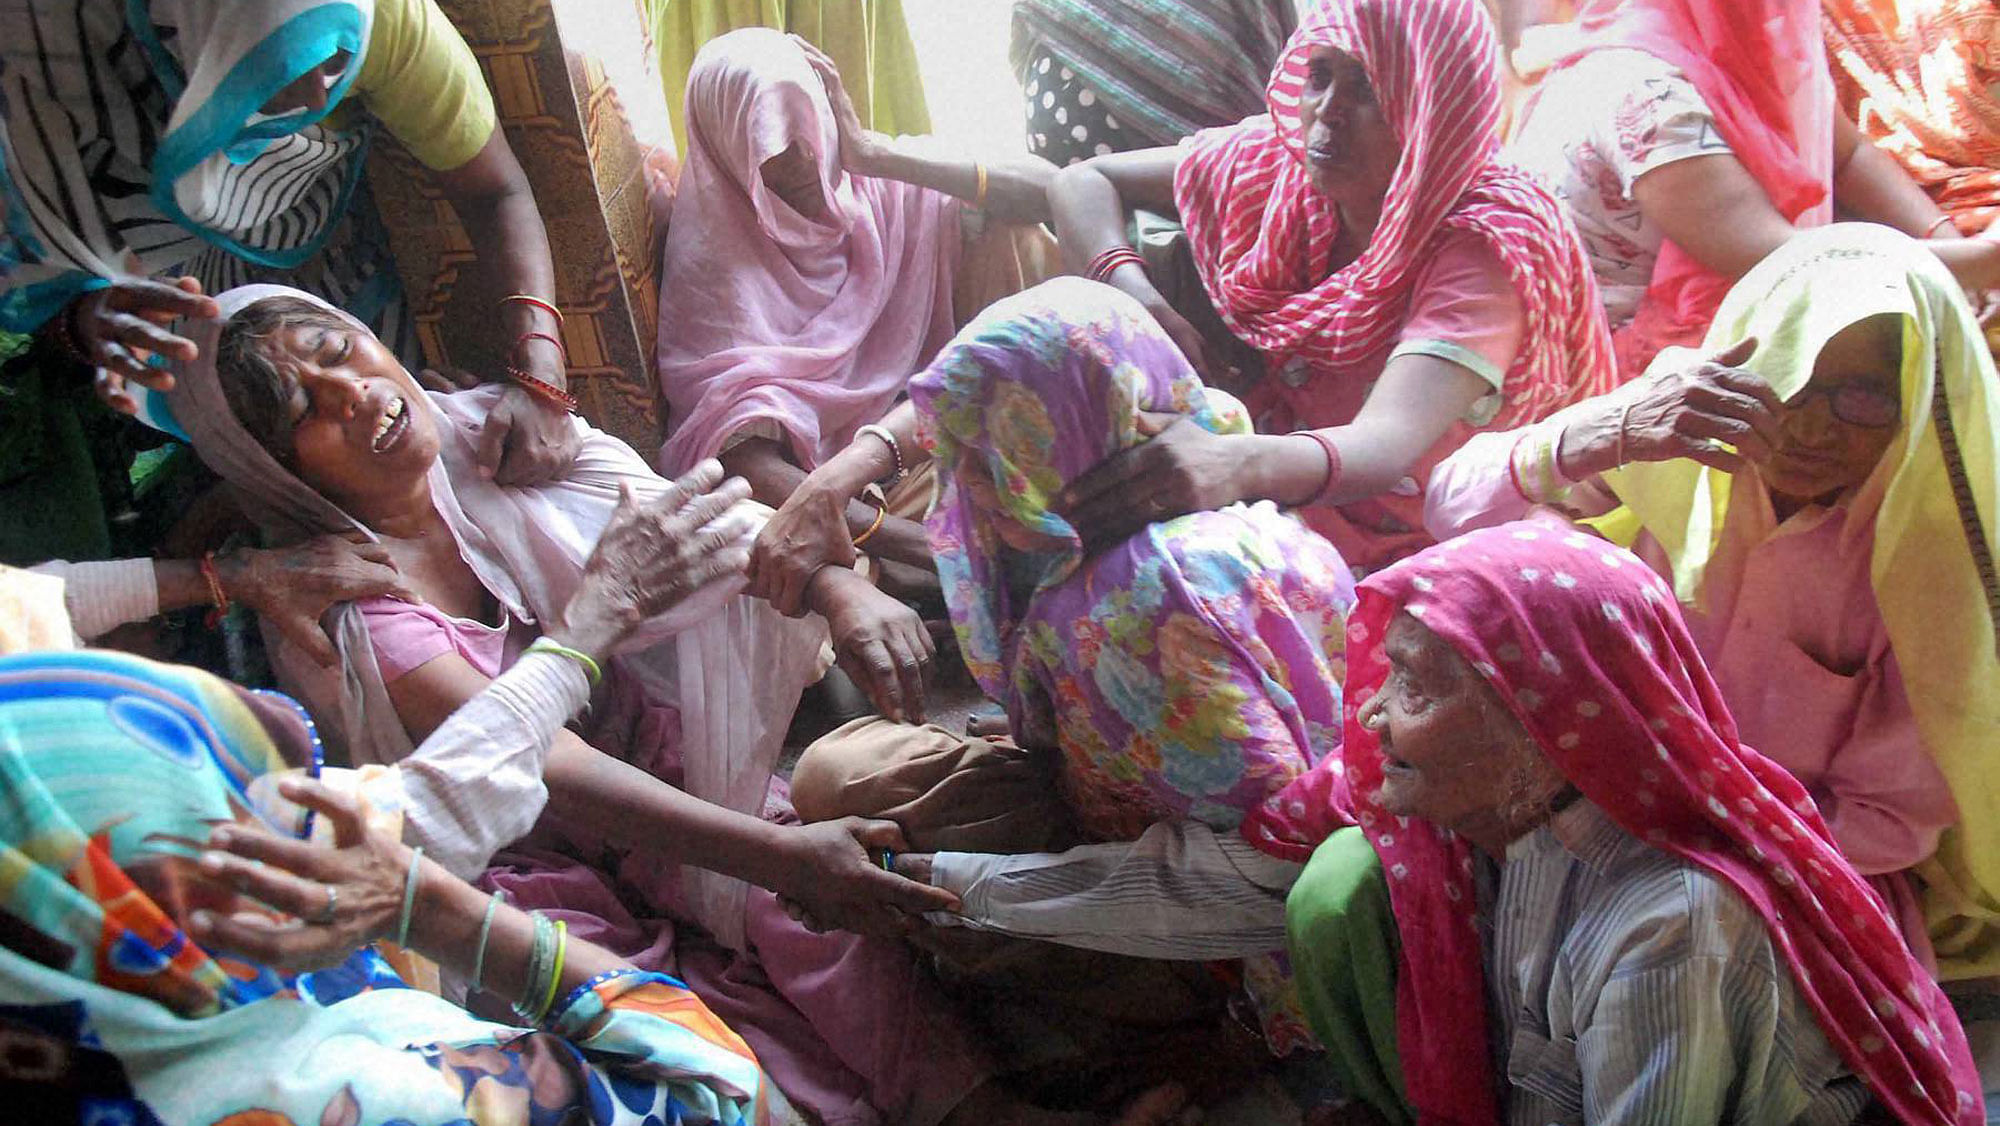 Relatives of the Dalit family mourn the death of the two children. (Photo: PTI)